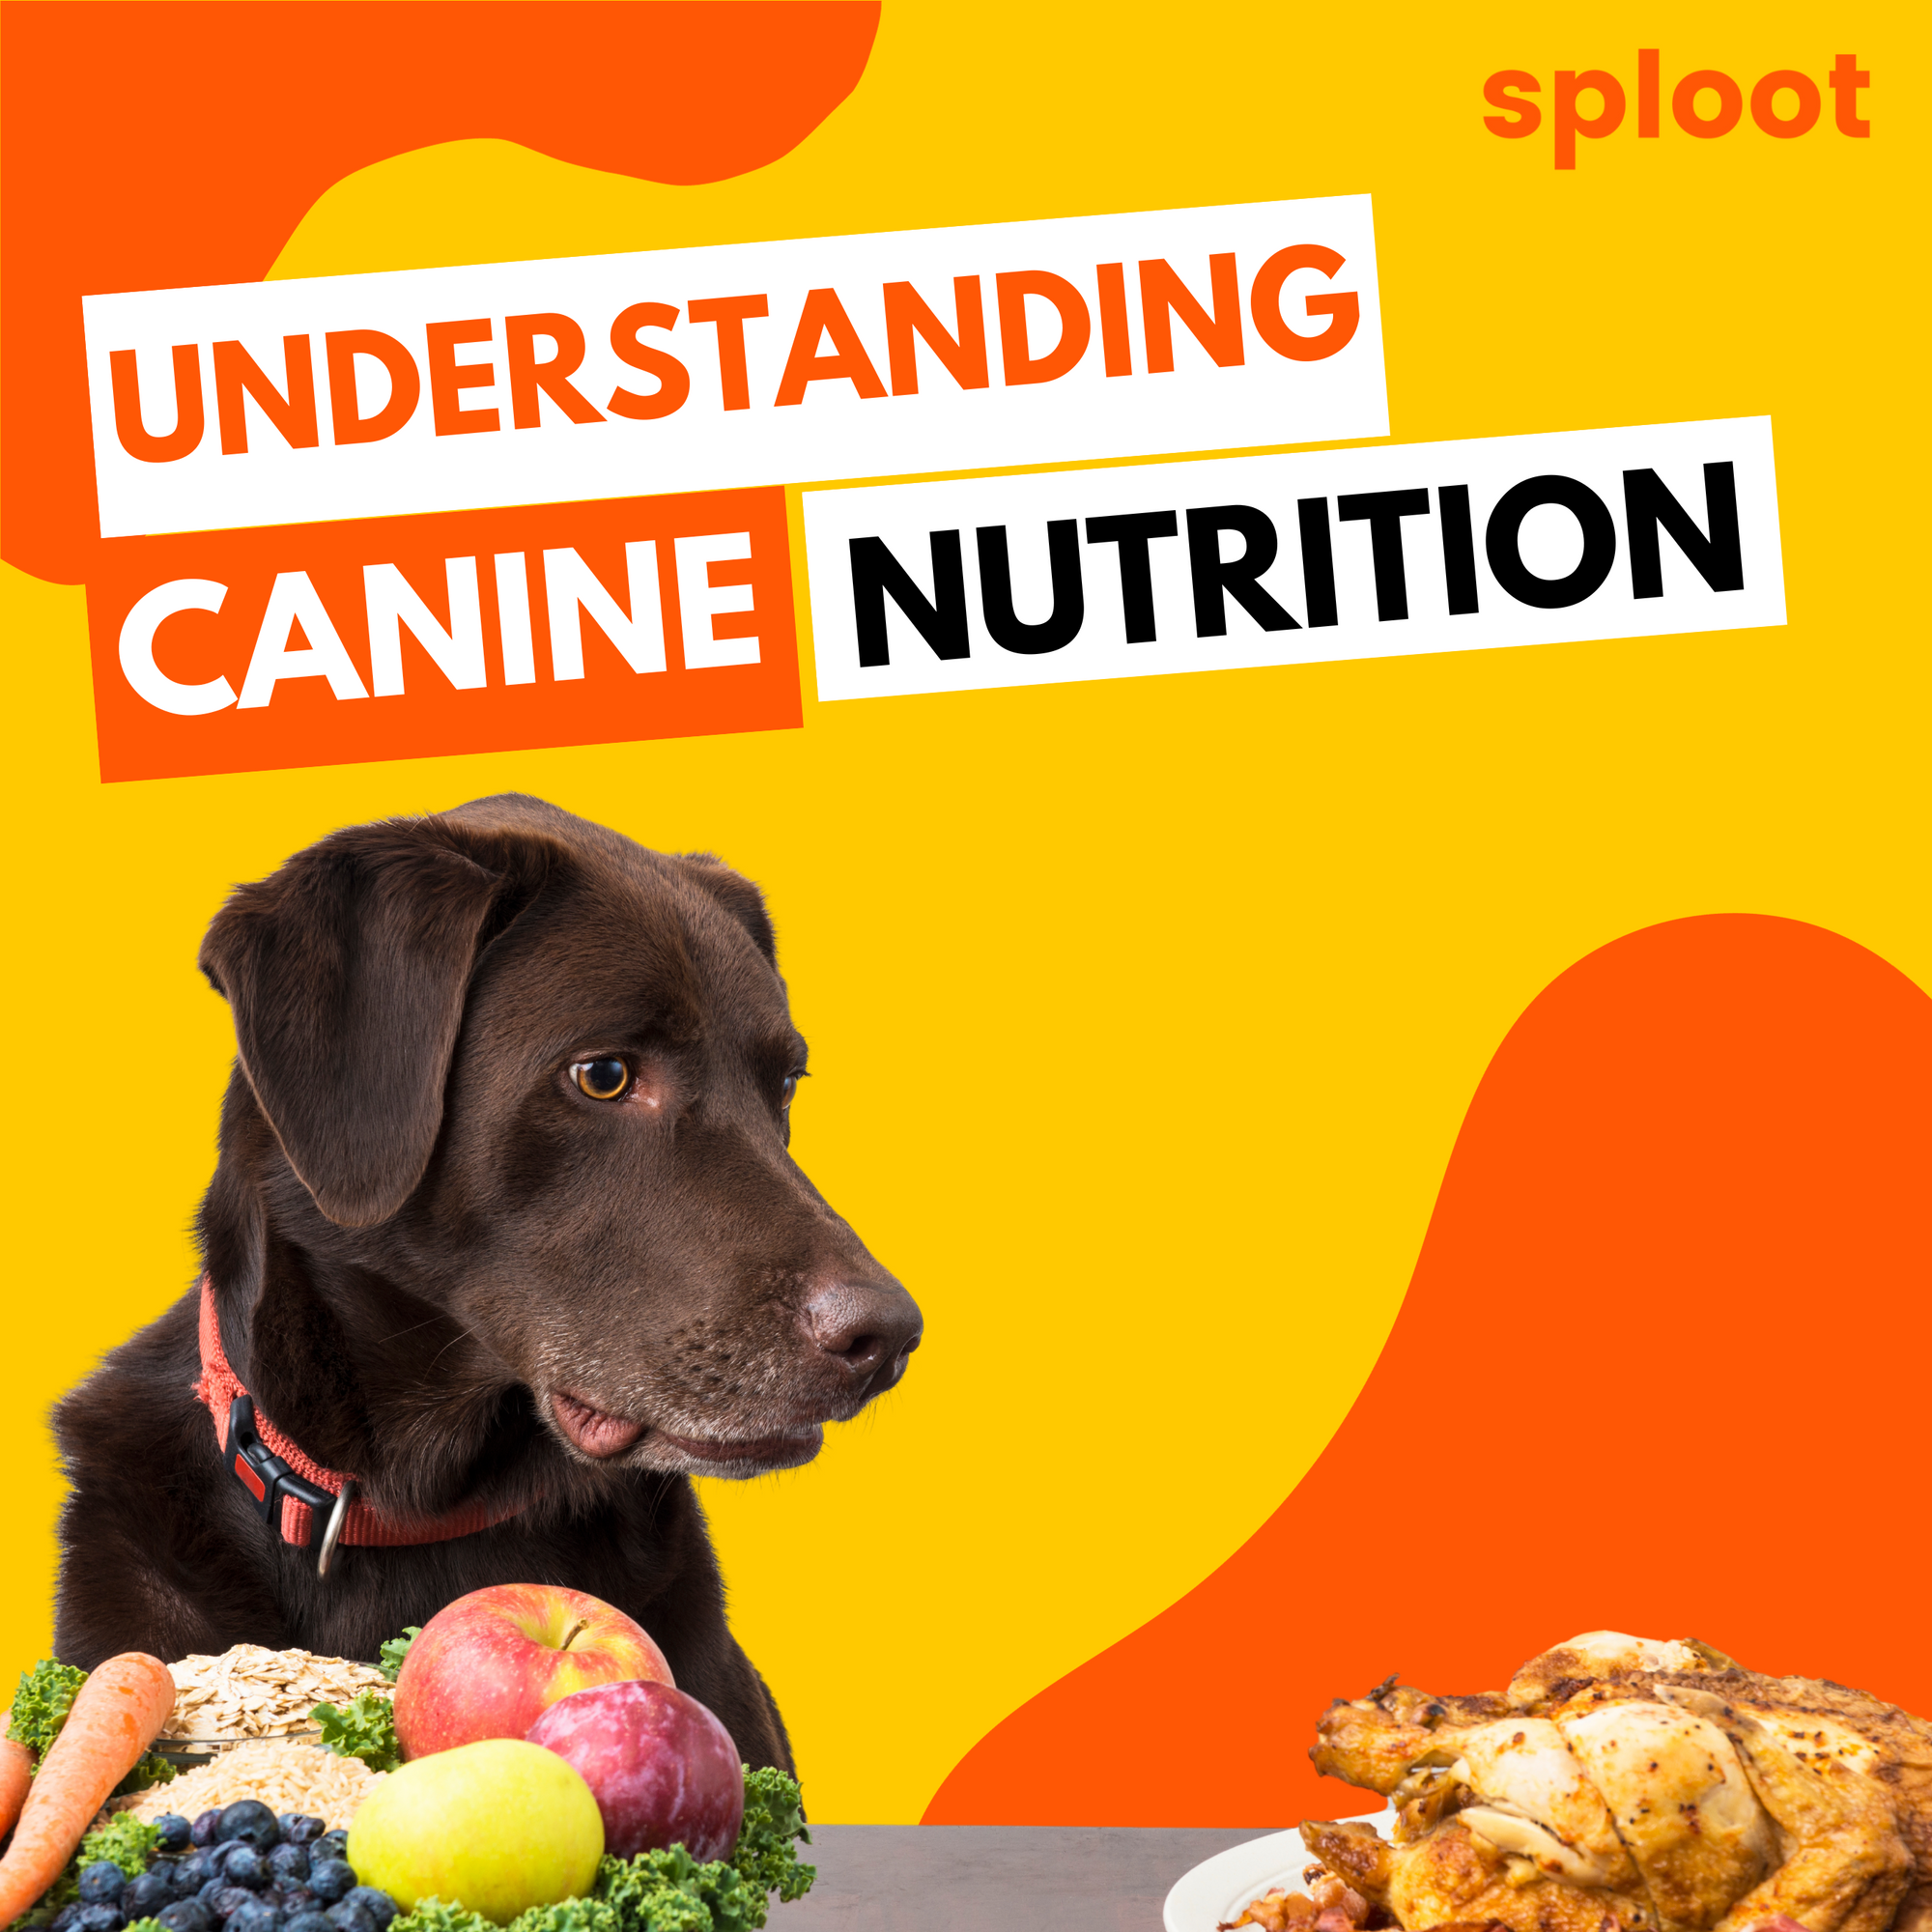 Proportional Food Requirements for Puppies at Different Life Stages